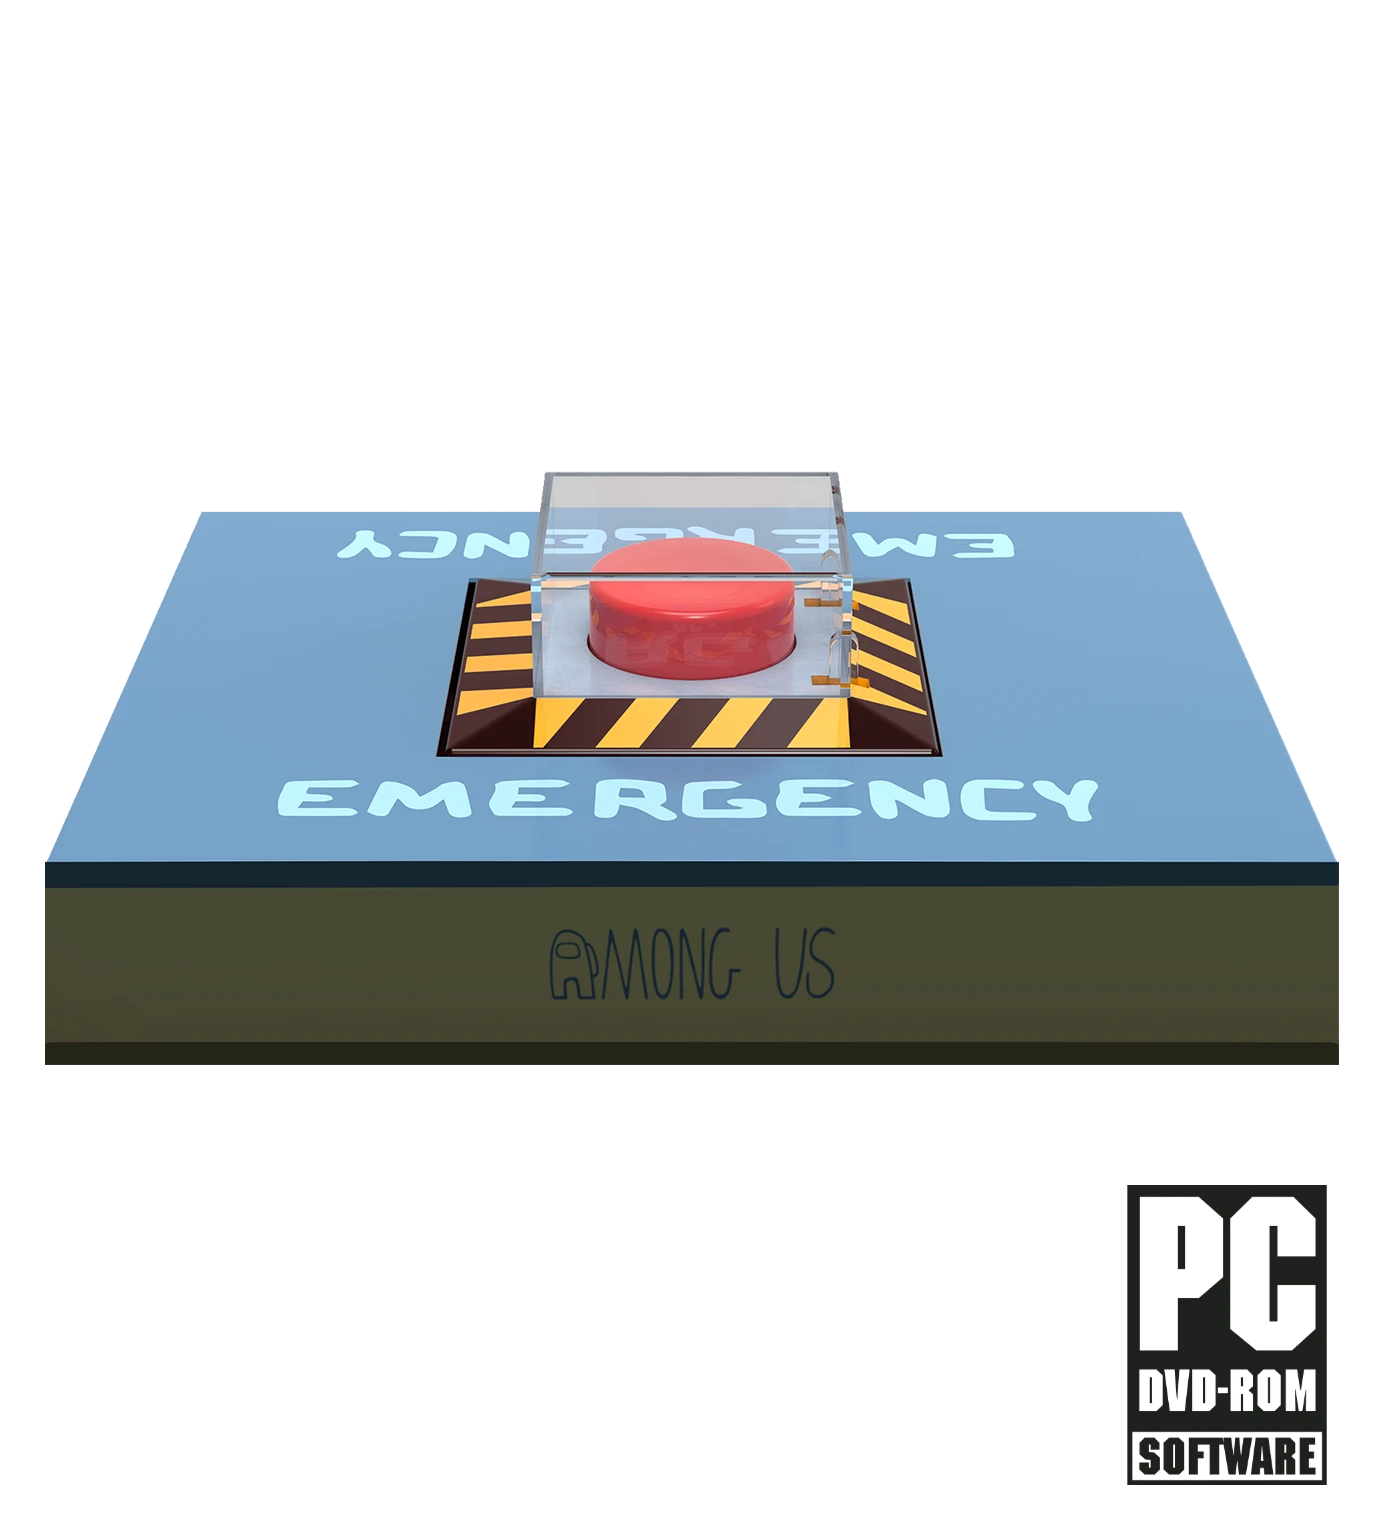 Among Us PC Collectors Edition Limited Run Games Emergency Meeting Box